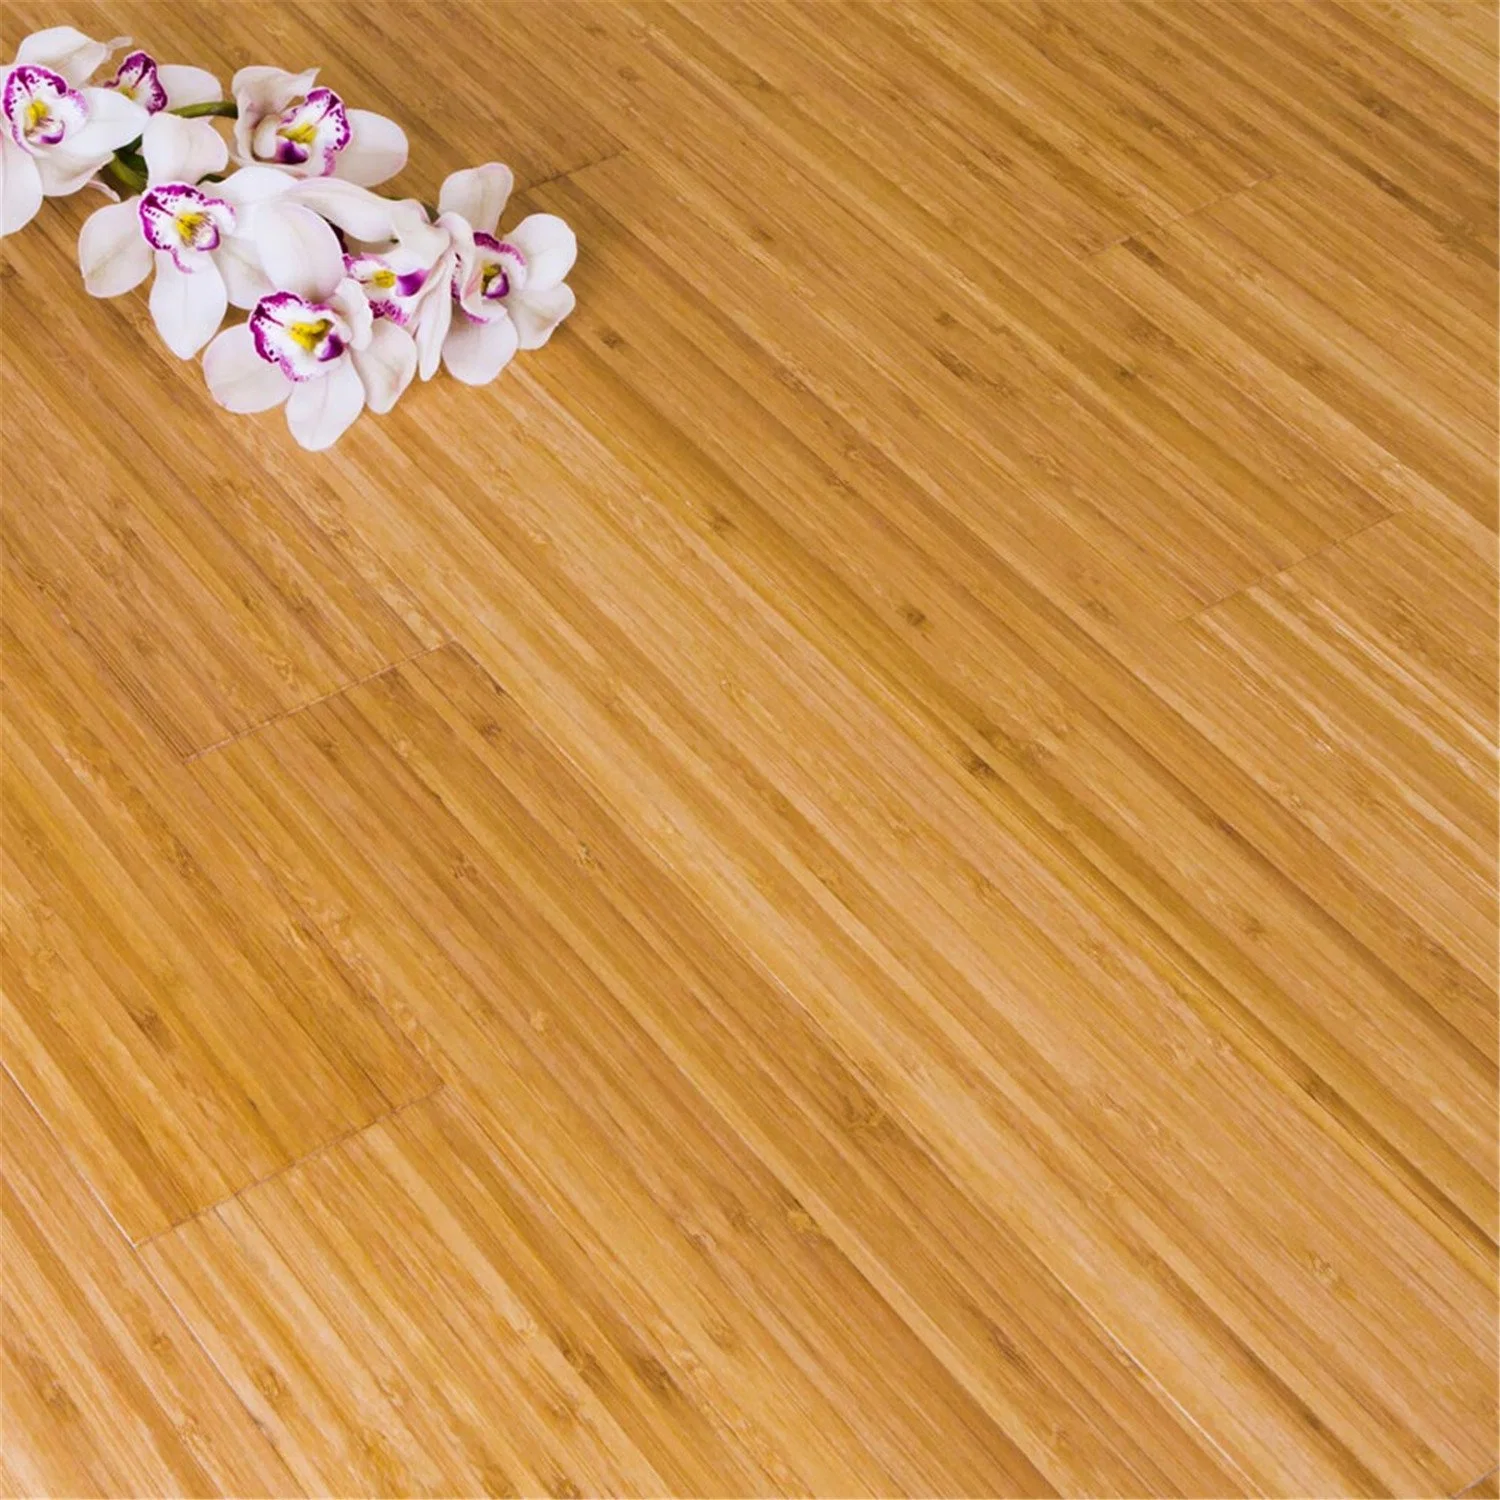 Horizontal or Vertical Pressed Solid Bamboo Flooring Made of China Moso Bamboo